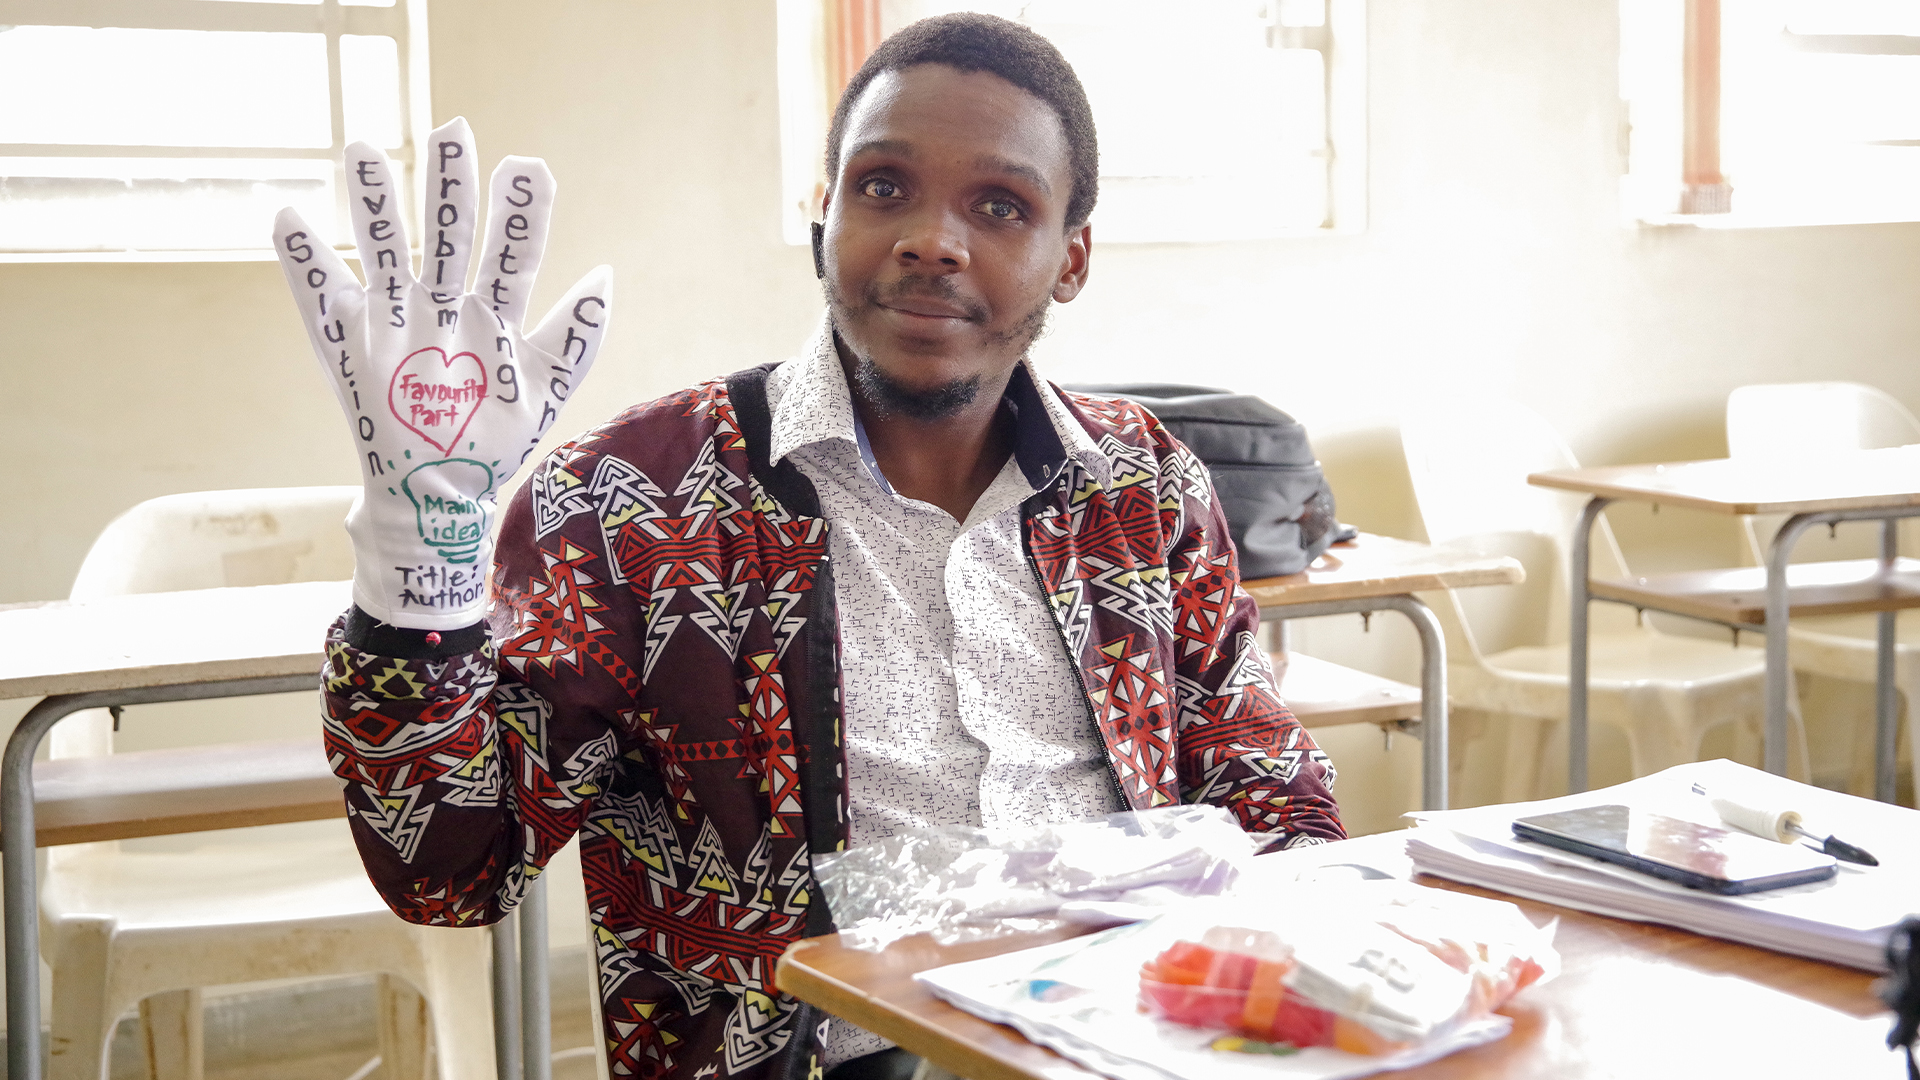 One of the participants in the foundation literacy course training. He has a glove on one hand with words written on the palm and fingers of the glove.